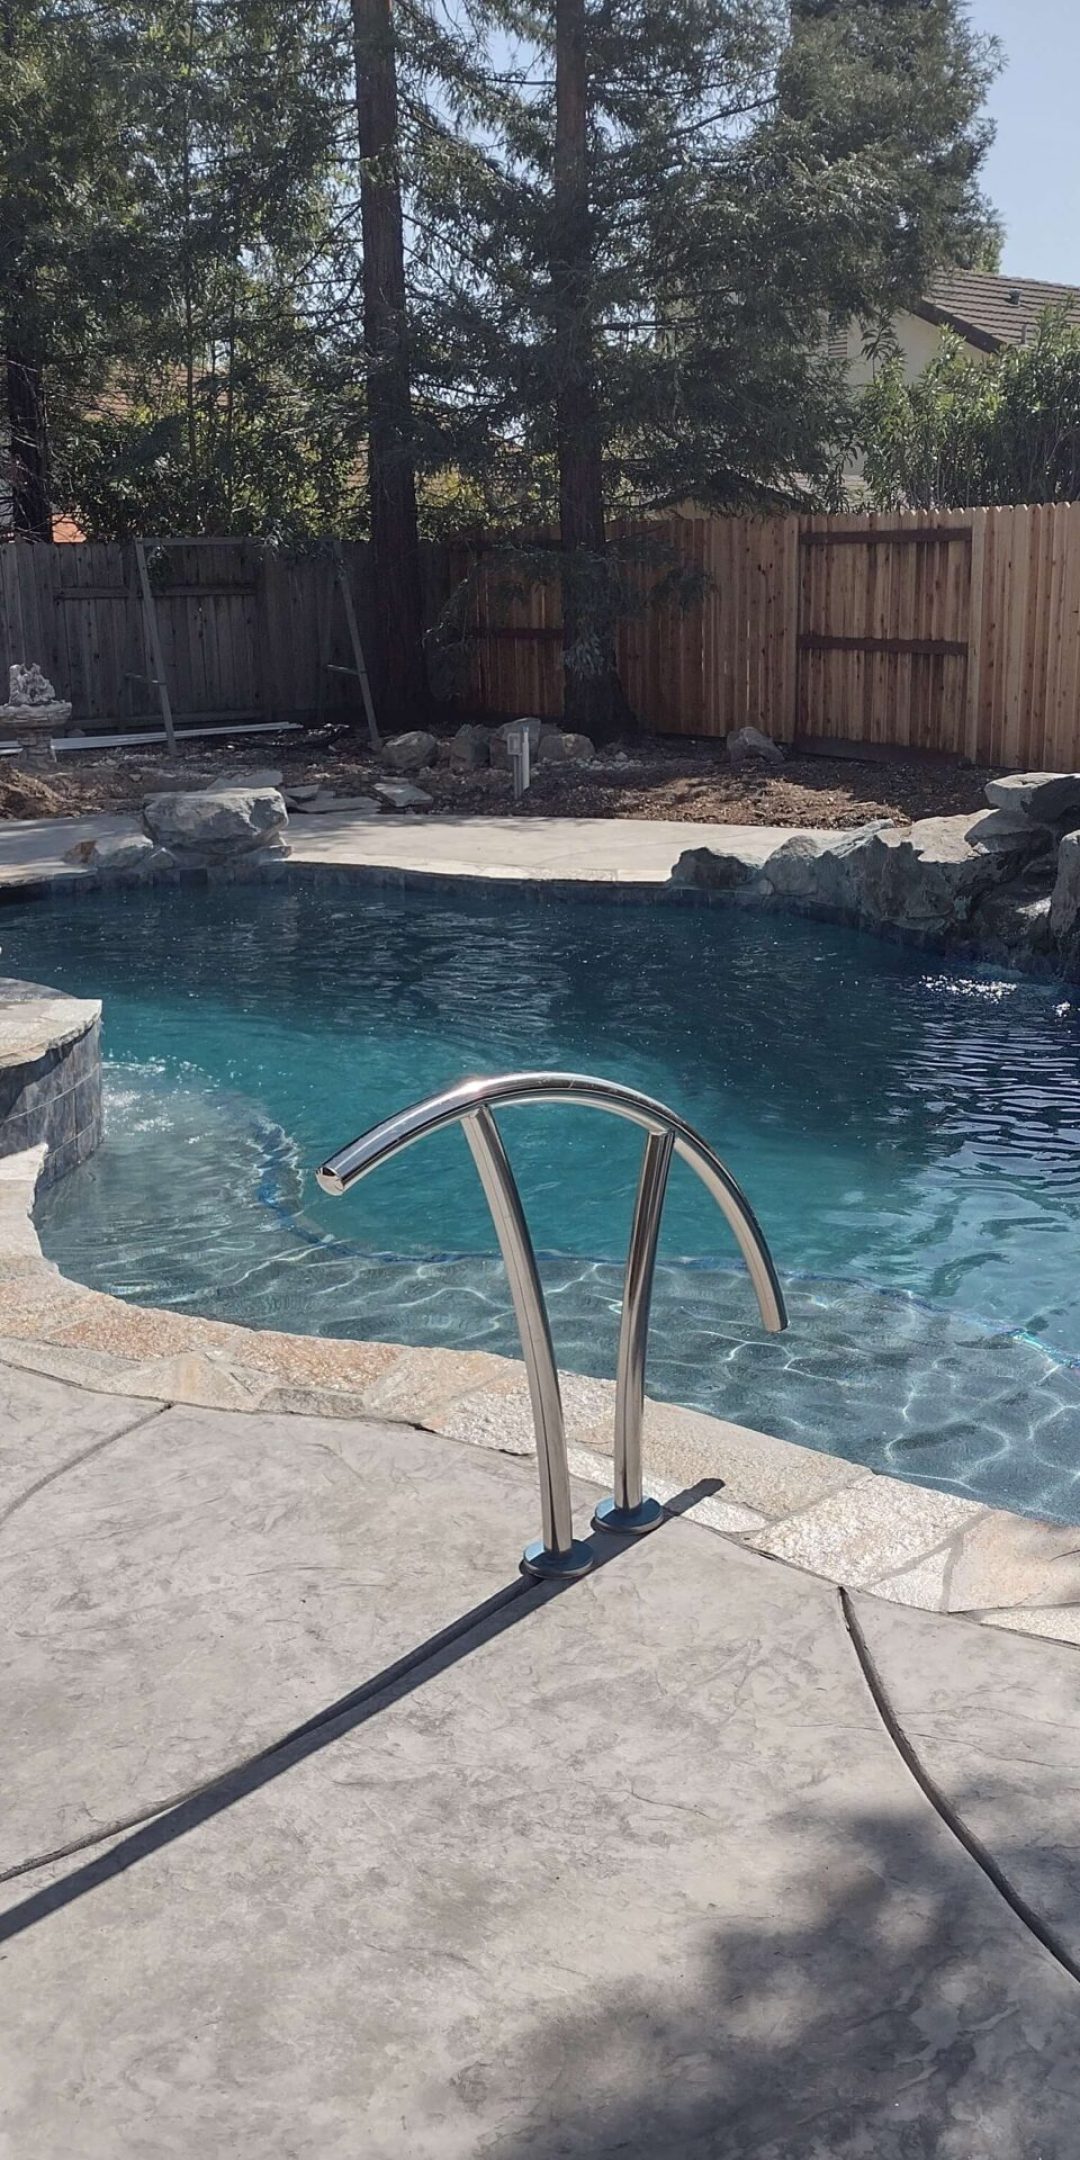 freeform pool with natural rock waterfall, bubbling spa, and silver handrail into the pool